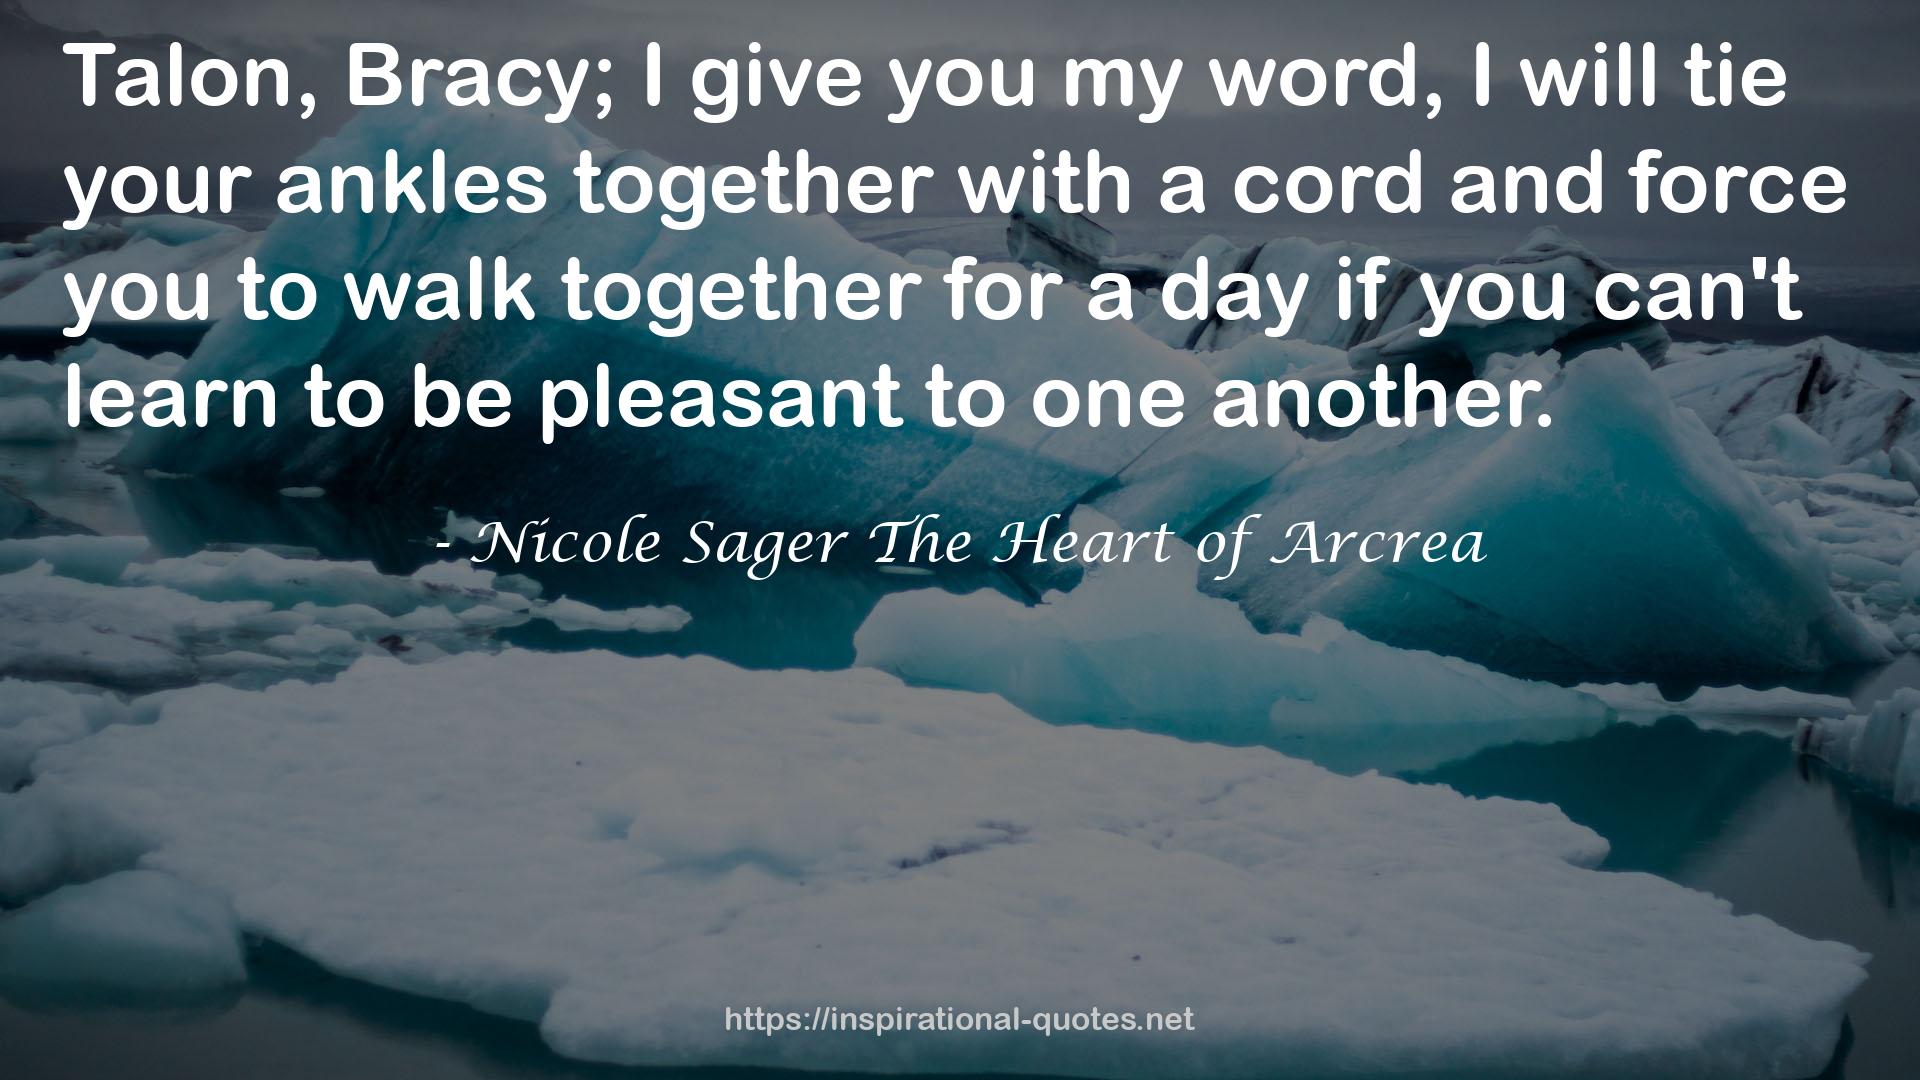 Nicole Sager The Heart of Arcrea QUOTES